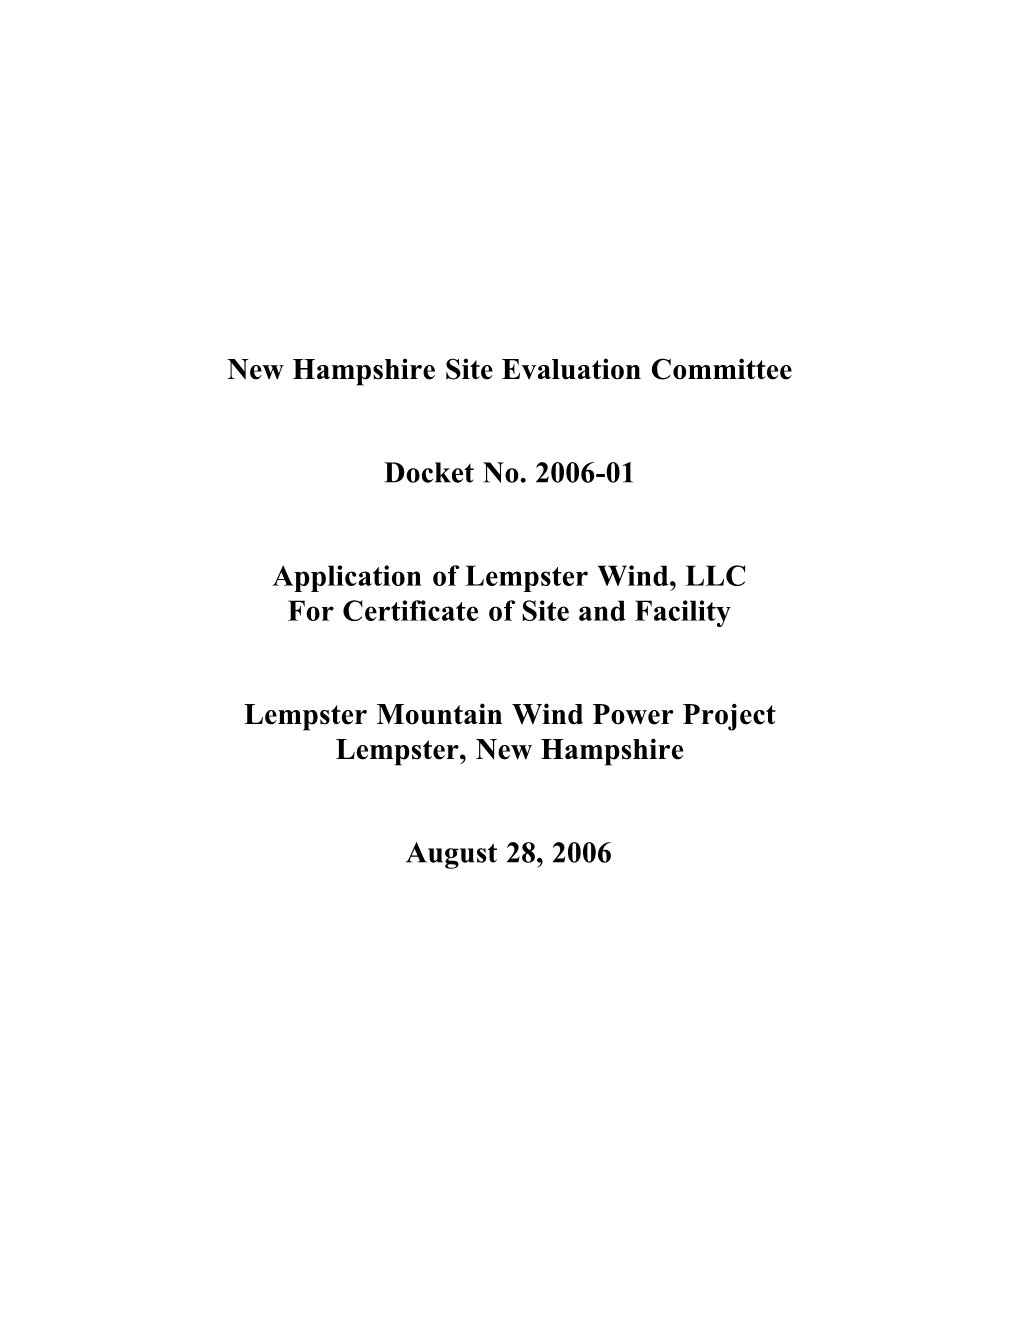 New Hampshire Site Evaluation Committee Docket No. 2006-01